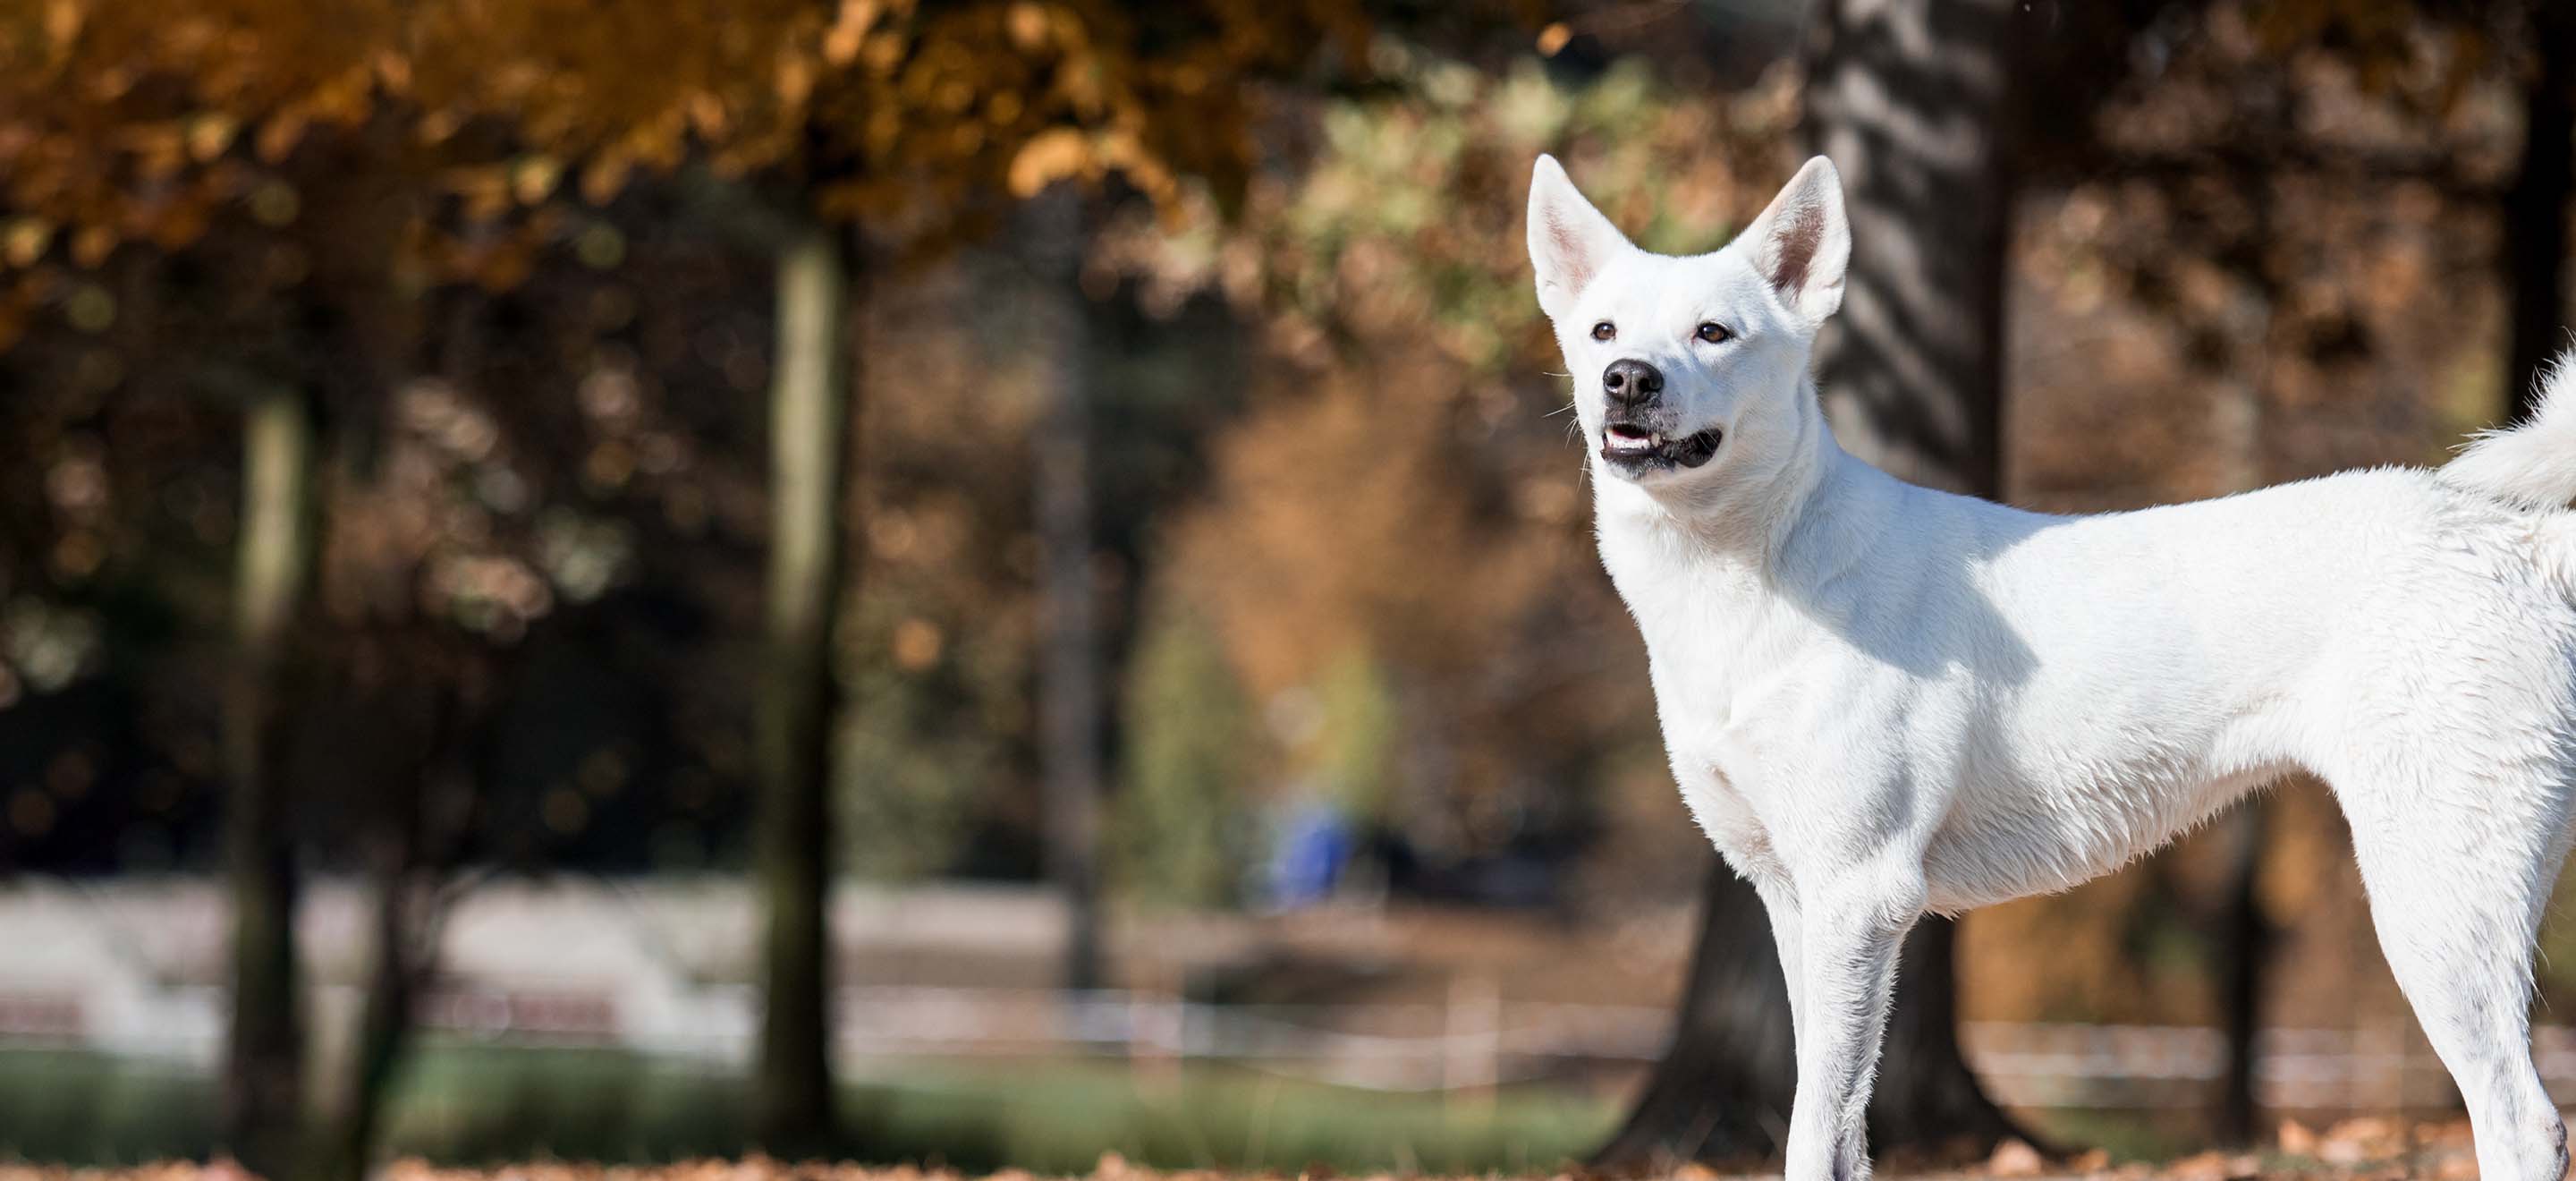 White Canaan dog standing in a park in Autumn image